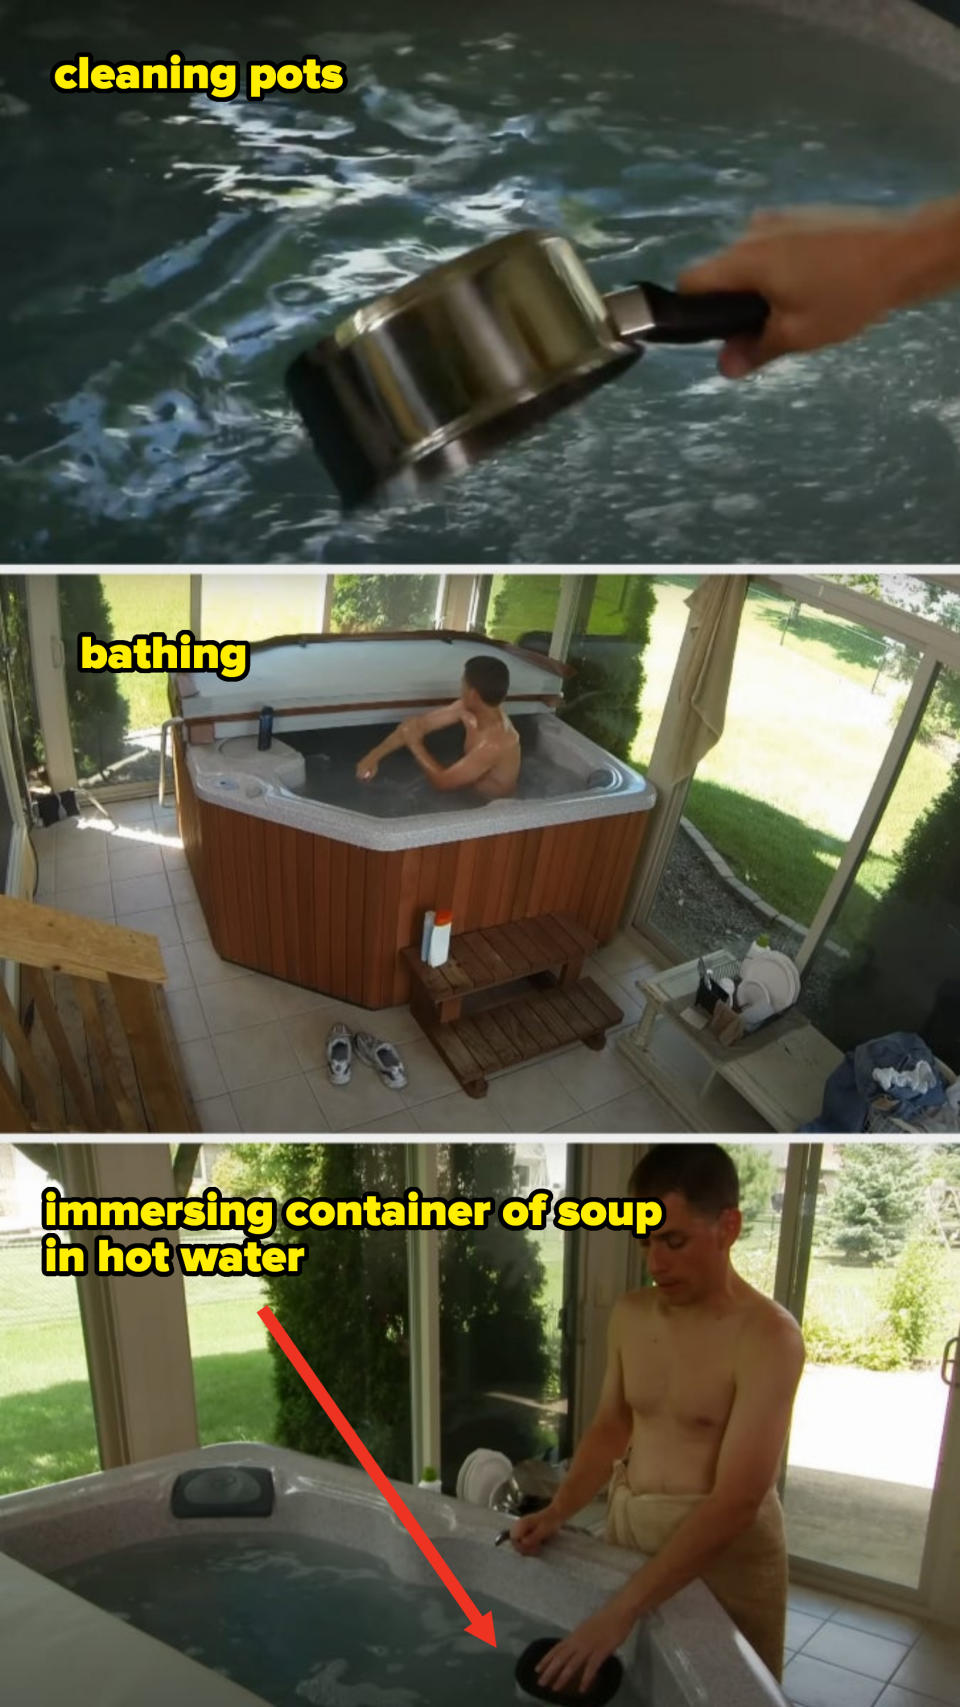 A person relaxes in a hot tub; three separate scenes show a hand with a paint roller, the person in the tub, and adjusting the tub settings